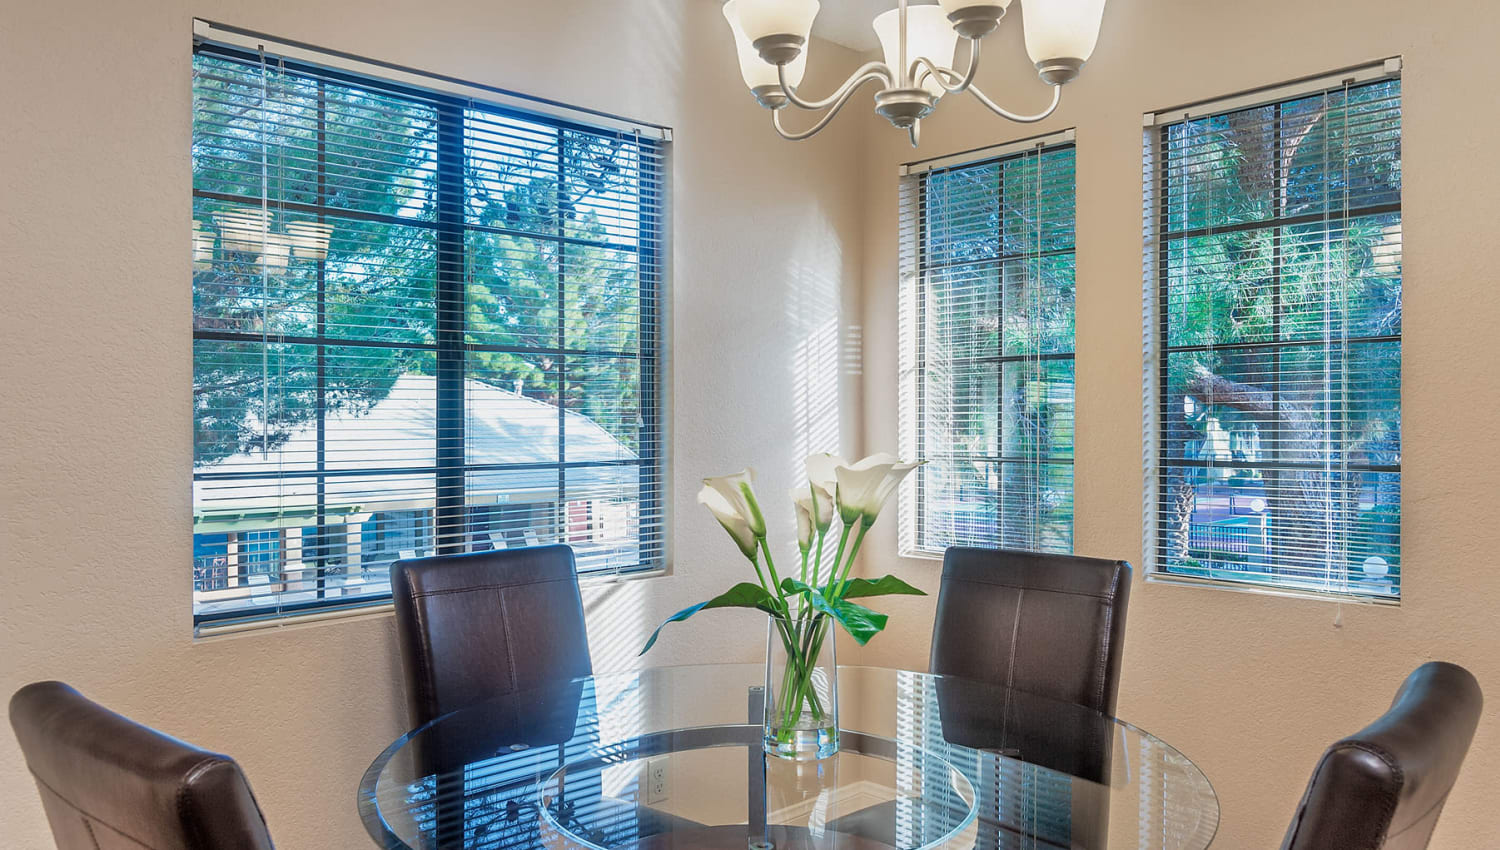 Well-furnished dining area with view of the community from a model home at Shelter Cove Apartments in Las Vegas, Nevada